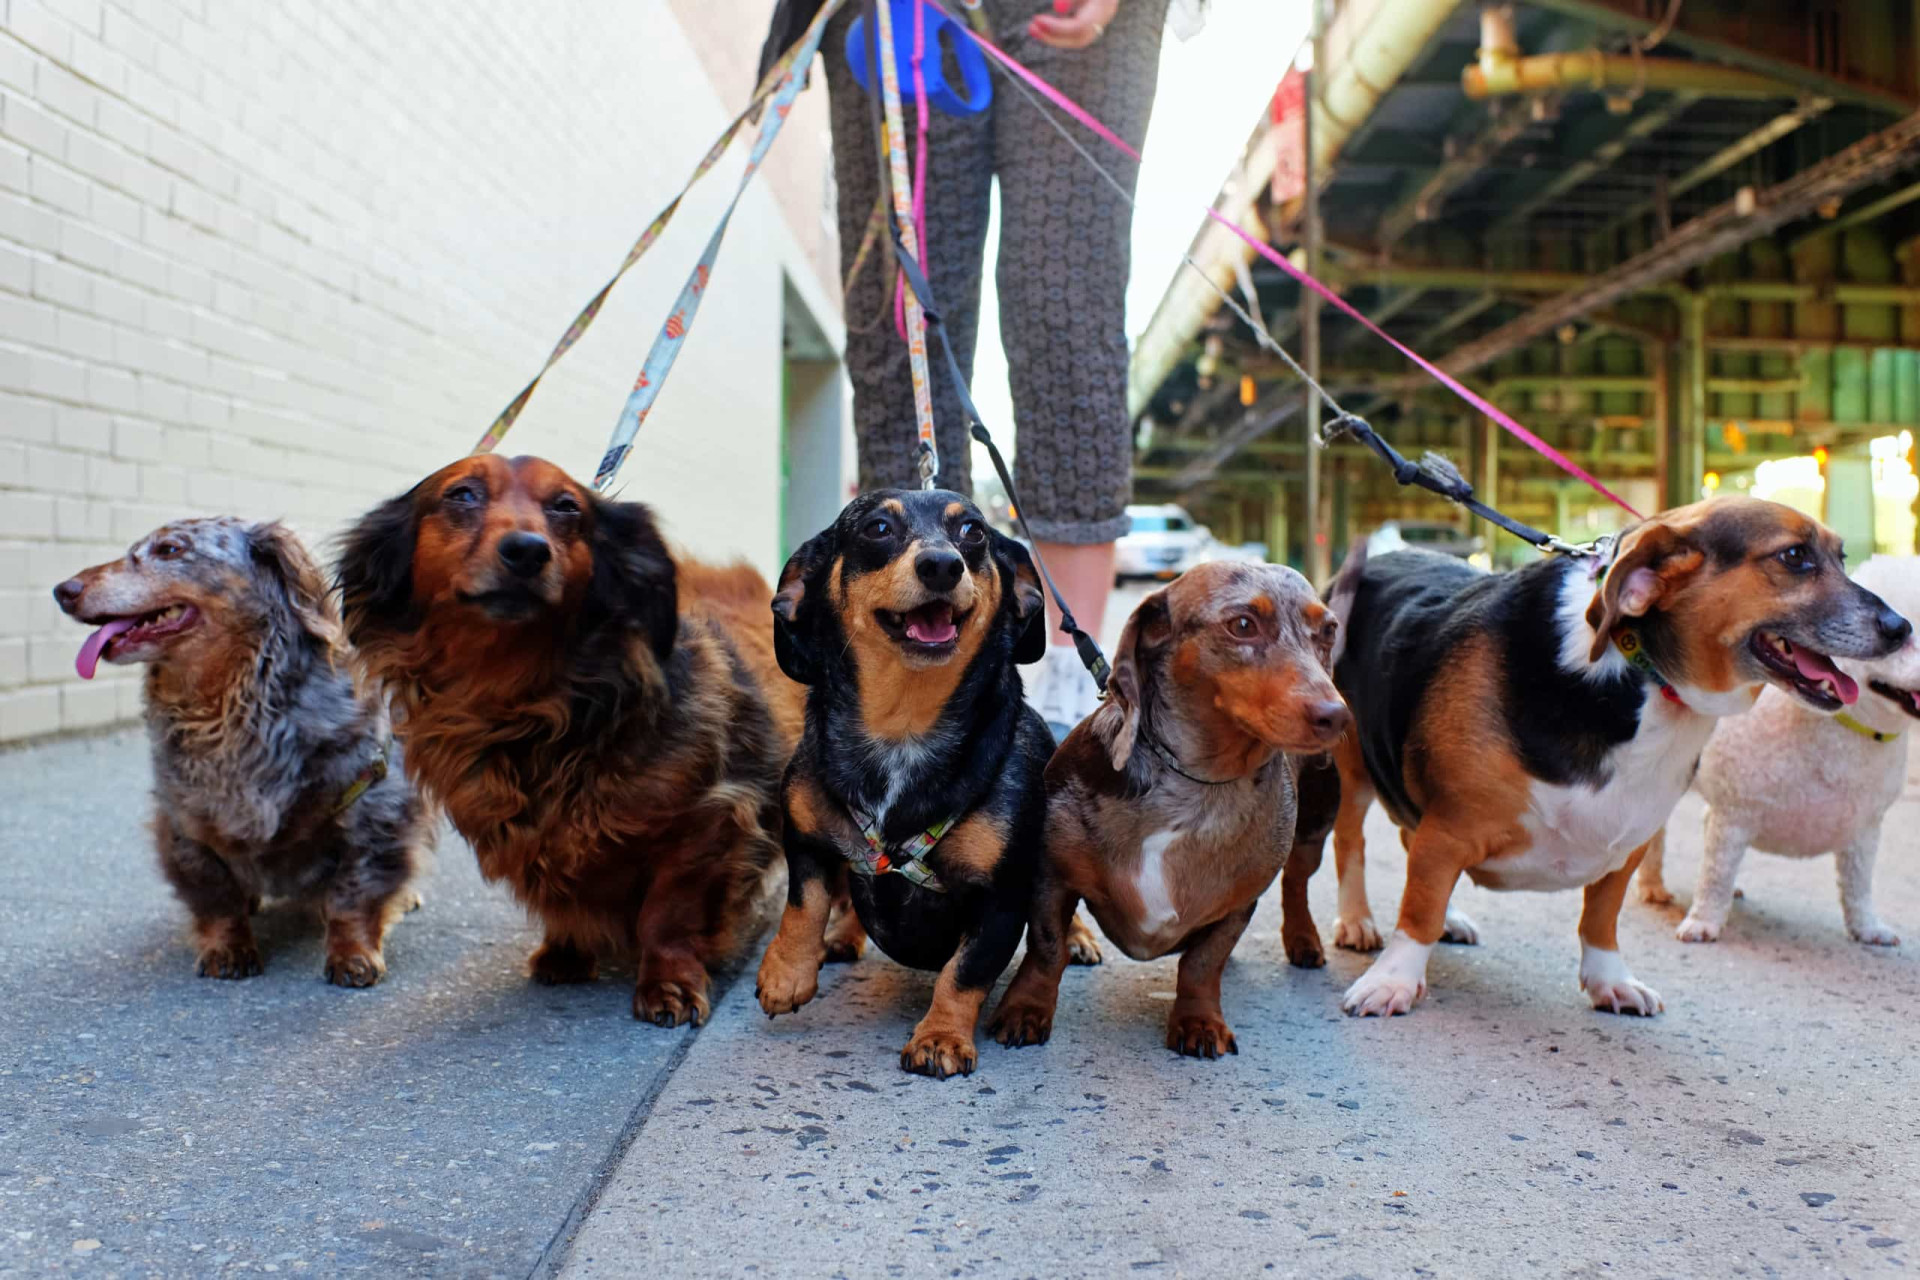 <p>Walking a cute canine typically from its residence and then returning sounds like tail-wagging stuff. But several <a href="https://www.starsinsider.com/lifestyle/431448/everything-you-need-to-know-about-fostering-a-dog" rel="noopener">dogs</a> at once can sometimes be, er, a houndful. And if you think it's just a walk in the park, then you're barking up the wrong tree.</p><p>You may also like:<a href="https://www.starsinsider.com/n/487828?utm_source=msn.com&utm_medium=display&utm_campaign=referral_description&utm_content=434684v2en-us"> Traditional Christmas dishes from around the world</a></p>